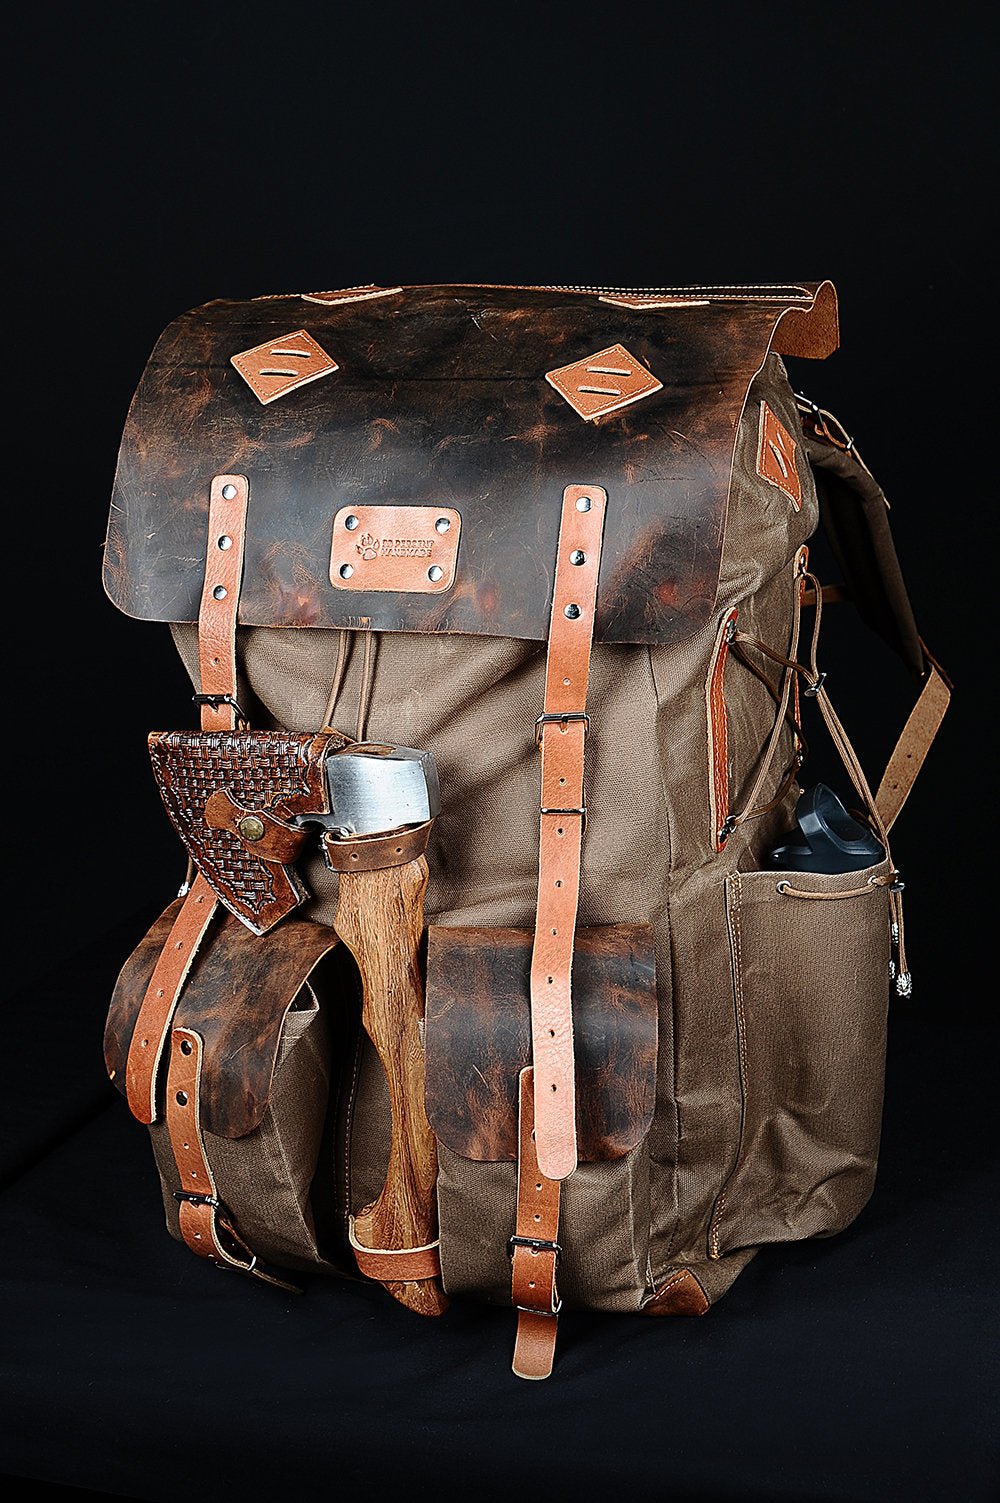 Bushcraft Backpack | Camping Backpack | Black-Brown-Black-White  | Waxed Canvas with Leather Details  | 50 L | Personalization  99percenthandmade   